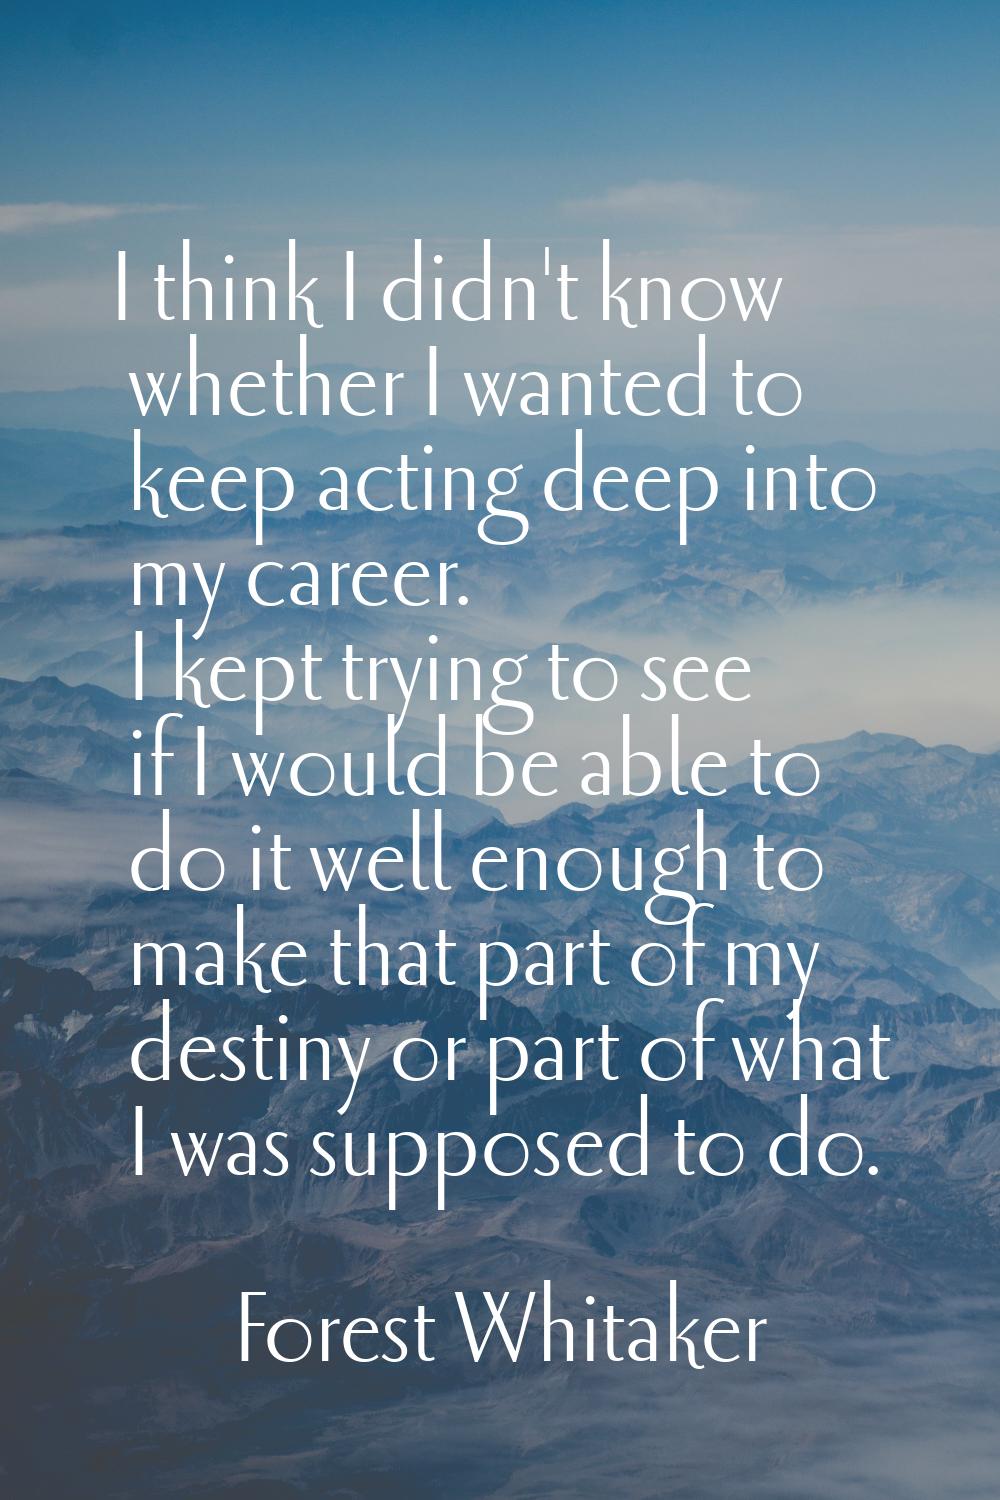 I think I didn't know whether I wanted to keep acting deep into my career. I kept trying to see if 